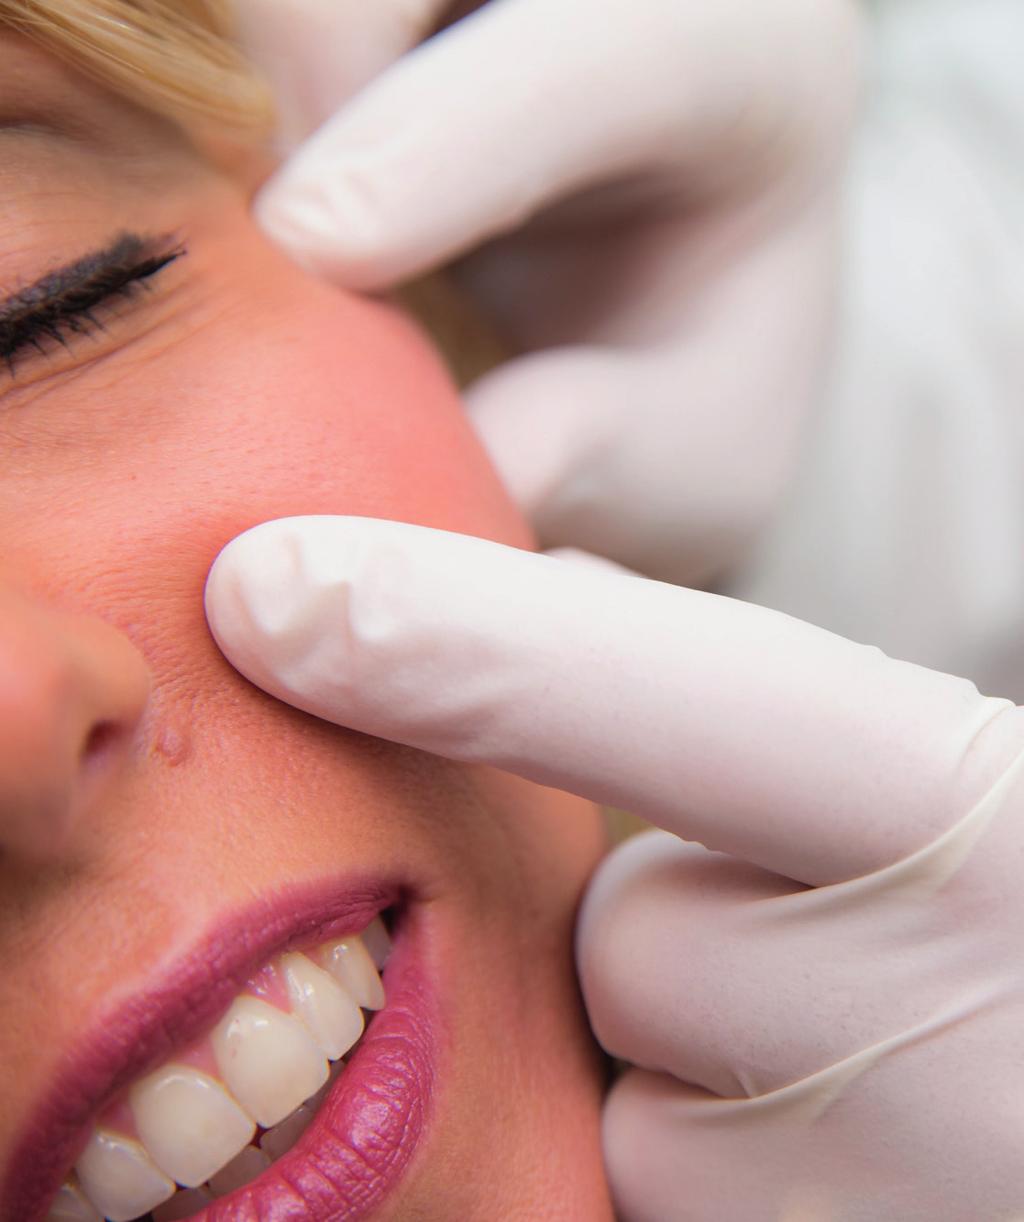 THINGS TO KNOW IF YOU RE CONSIDERING DERMAL FILLERS Whether you are considering getting dermal fillers to smooth out wrinkles or enhance facial contours, a quick look at some criteria and facts will